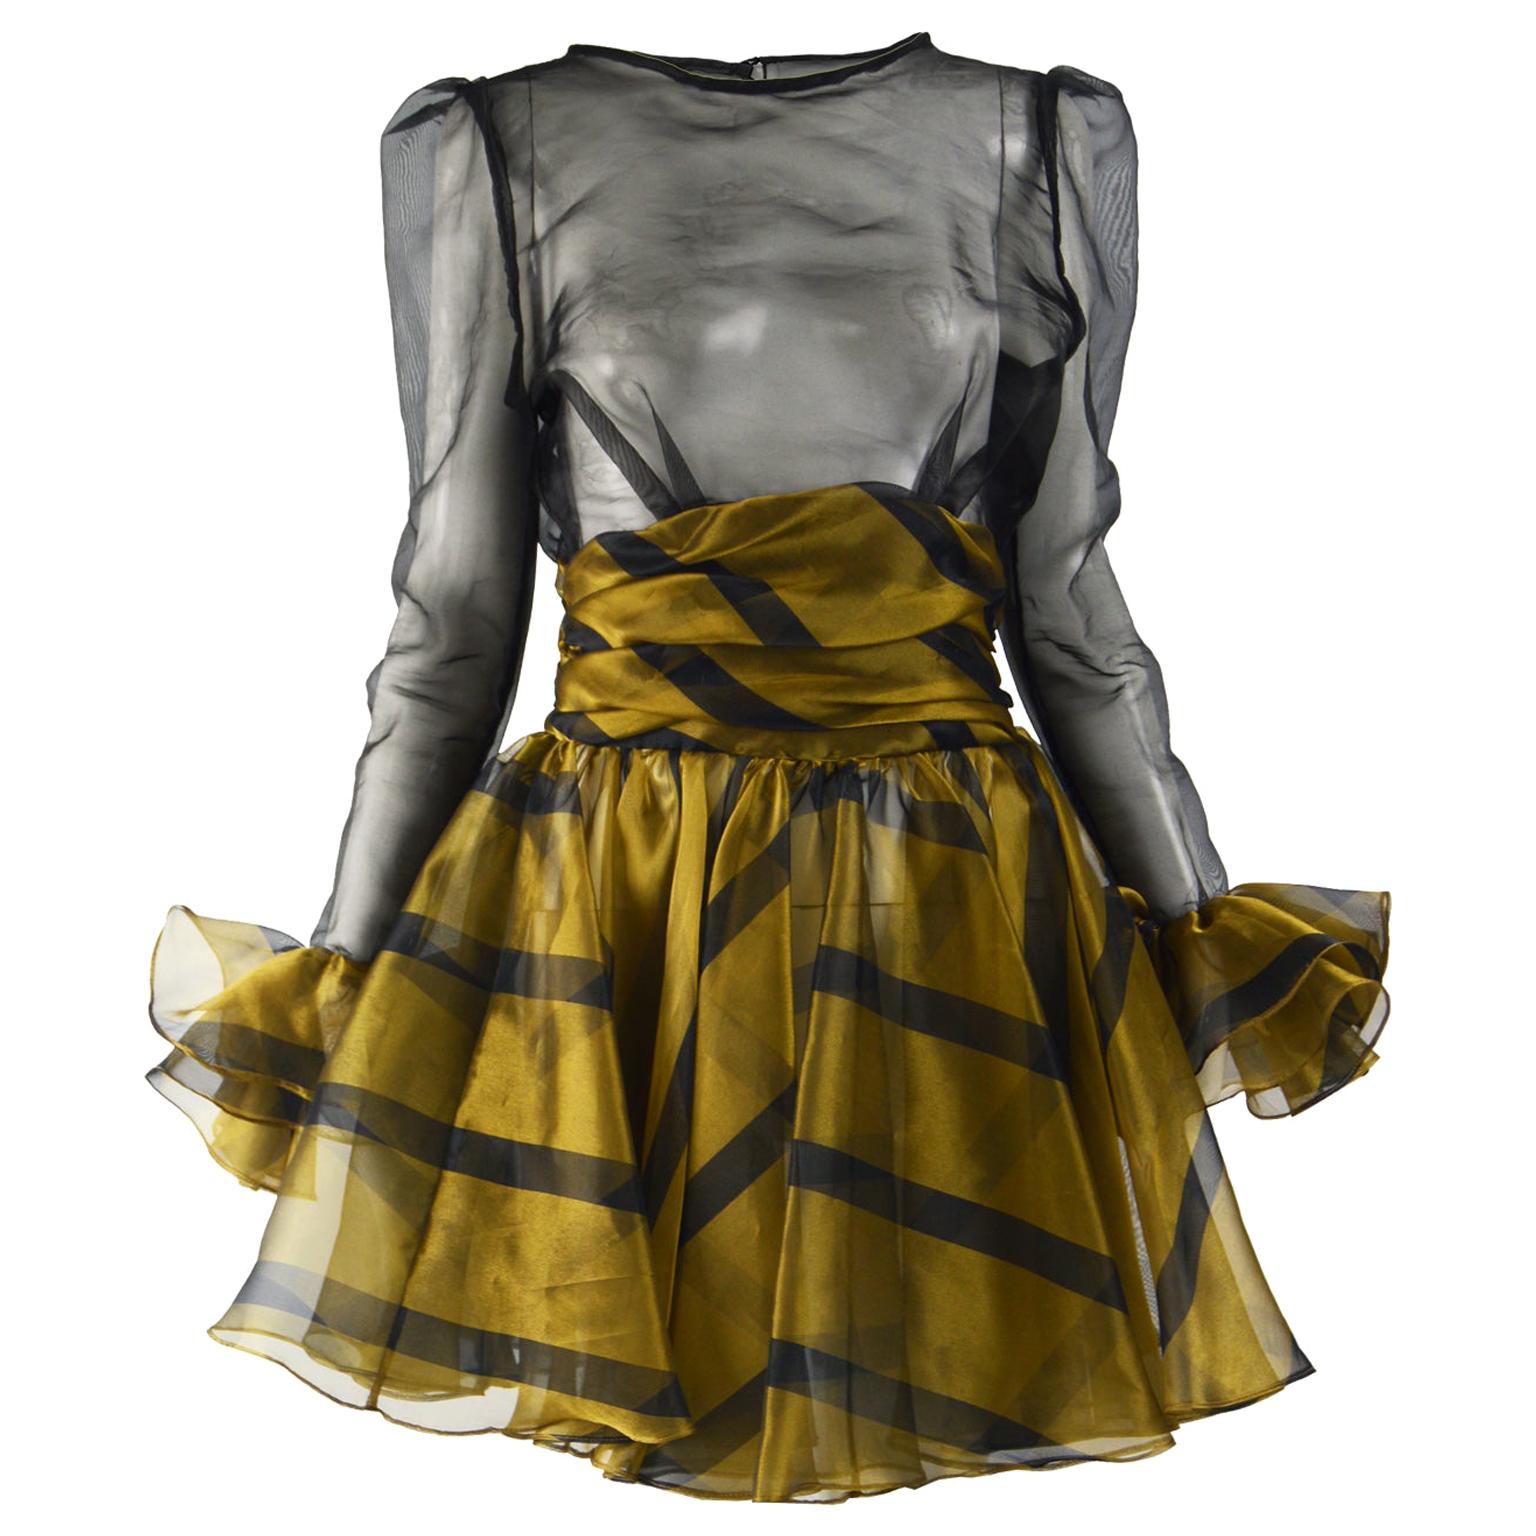 Roots 1980s Vintage Sheer Black & Gold Party Dress